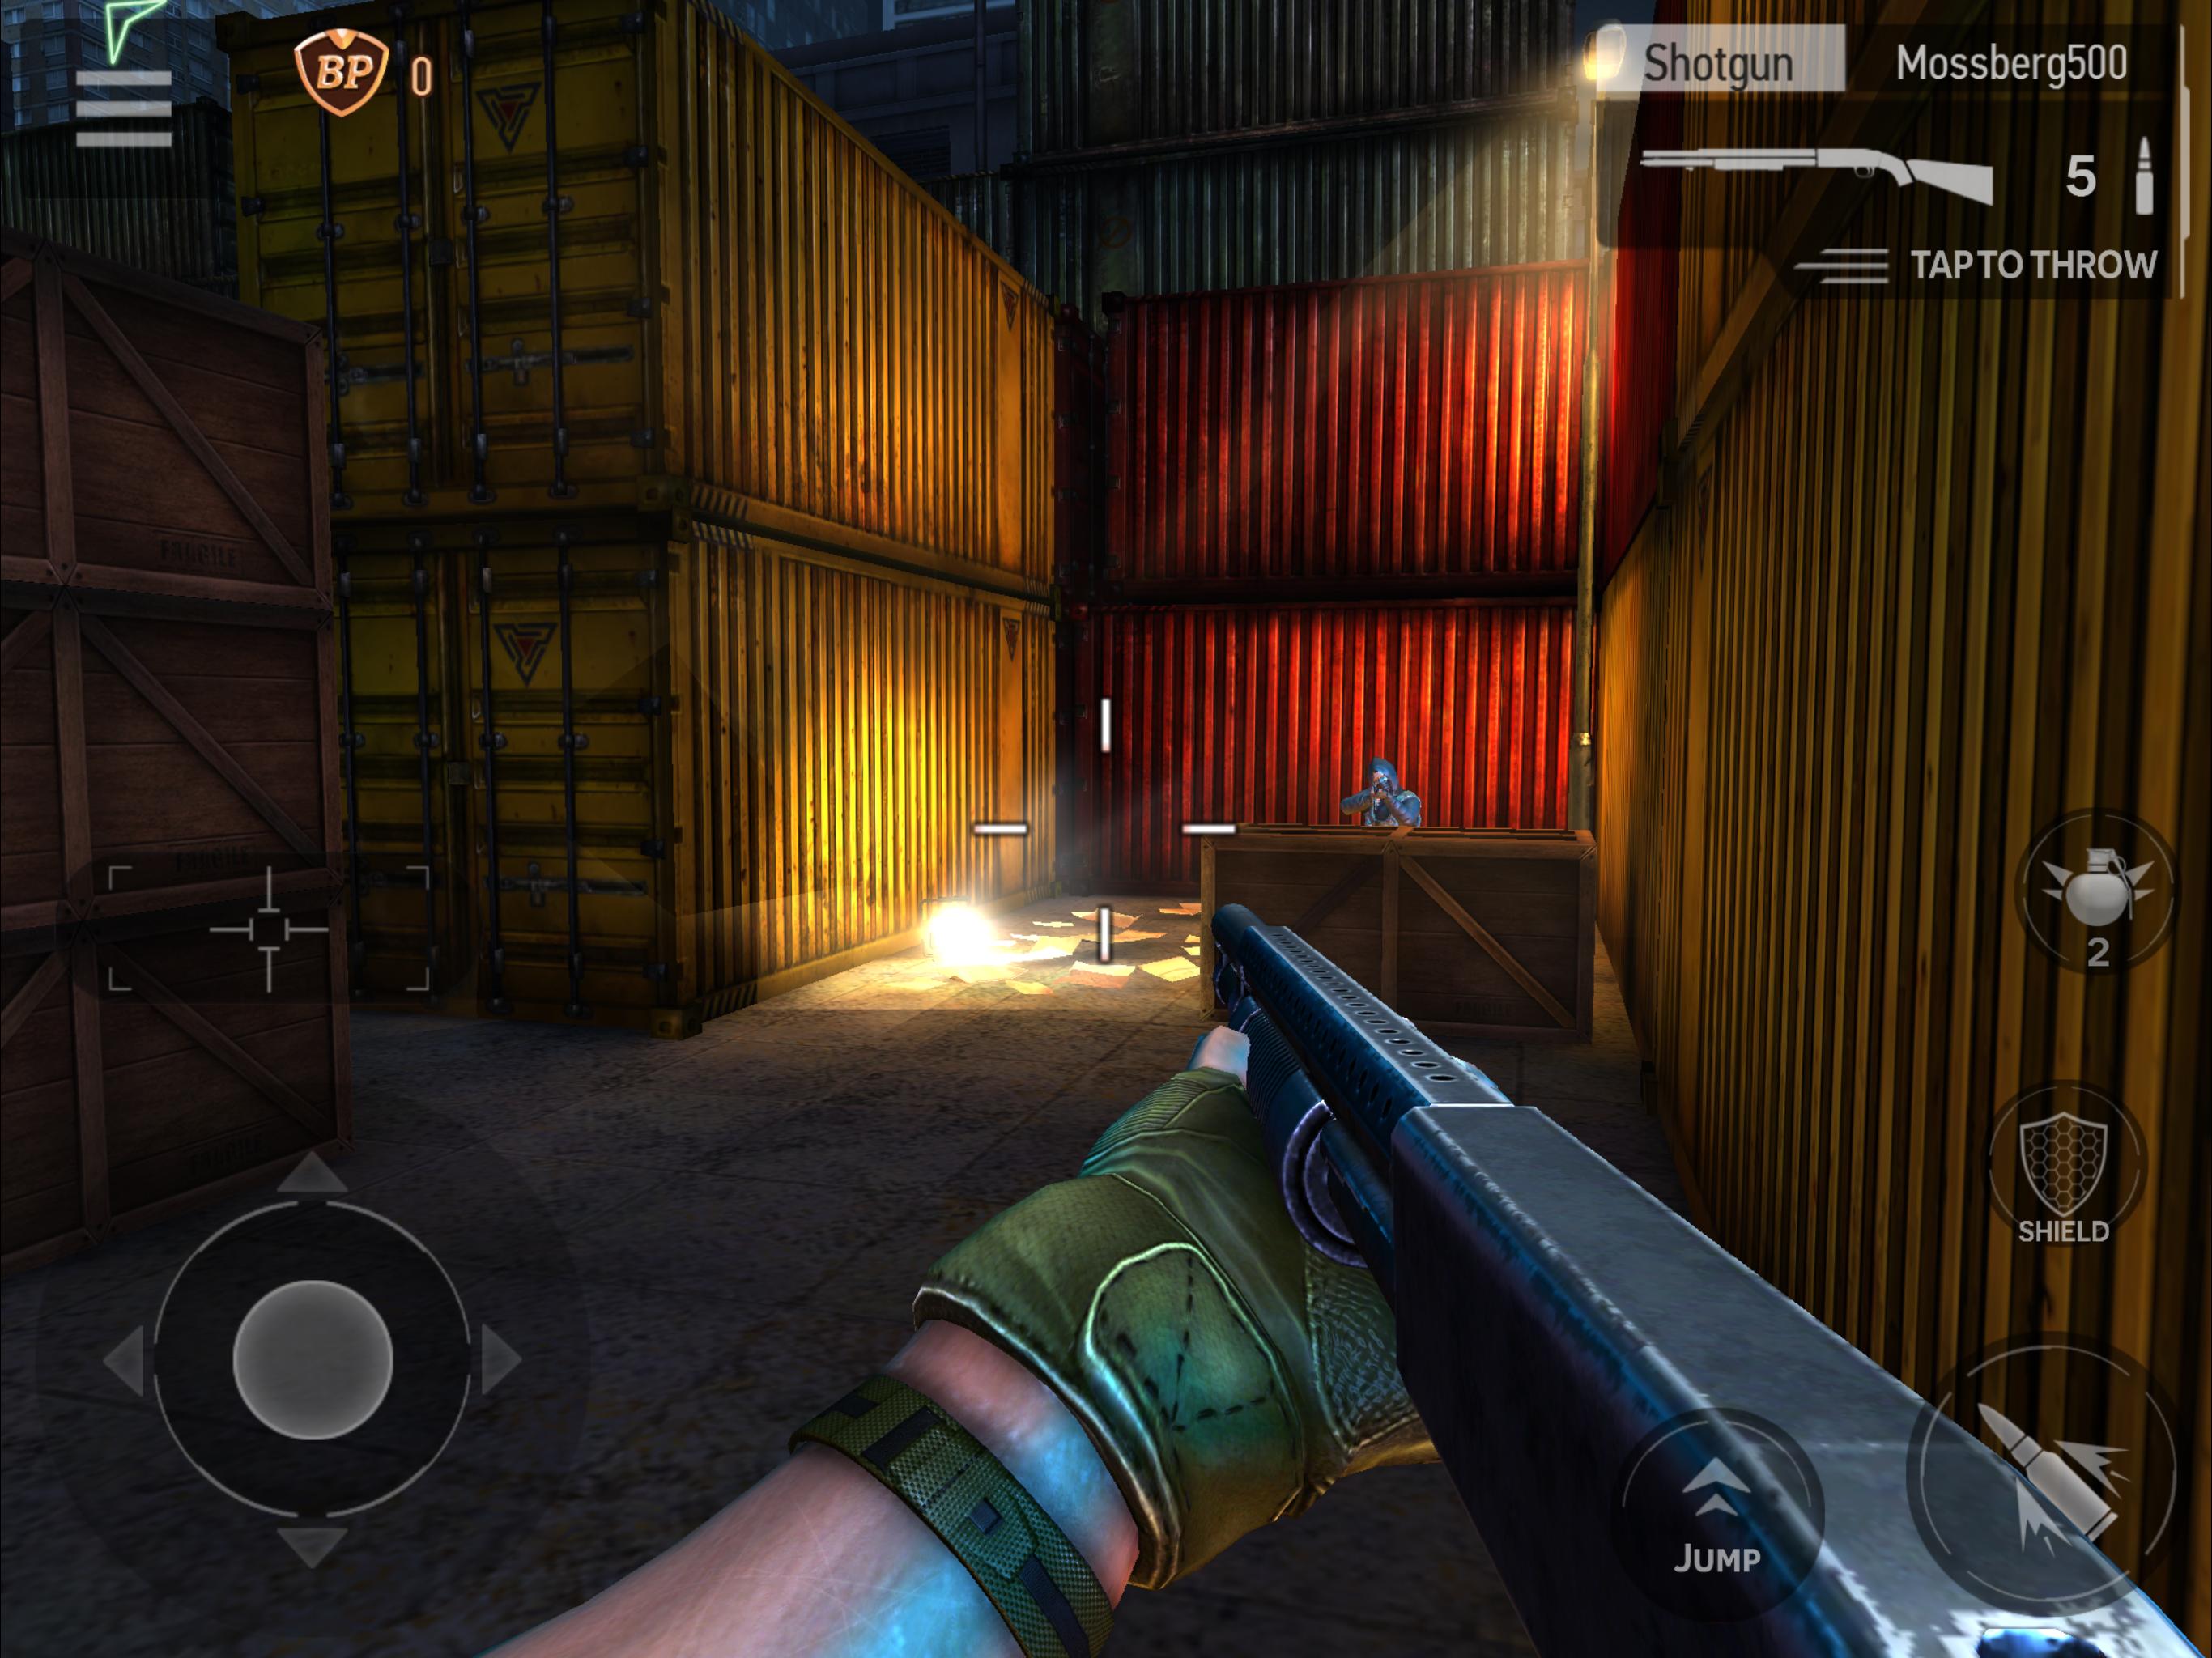 FZ9 for Android - APK Download - 